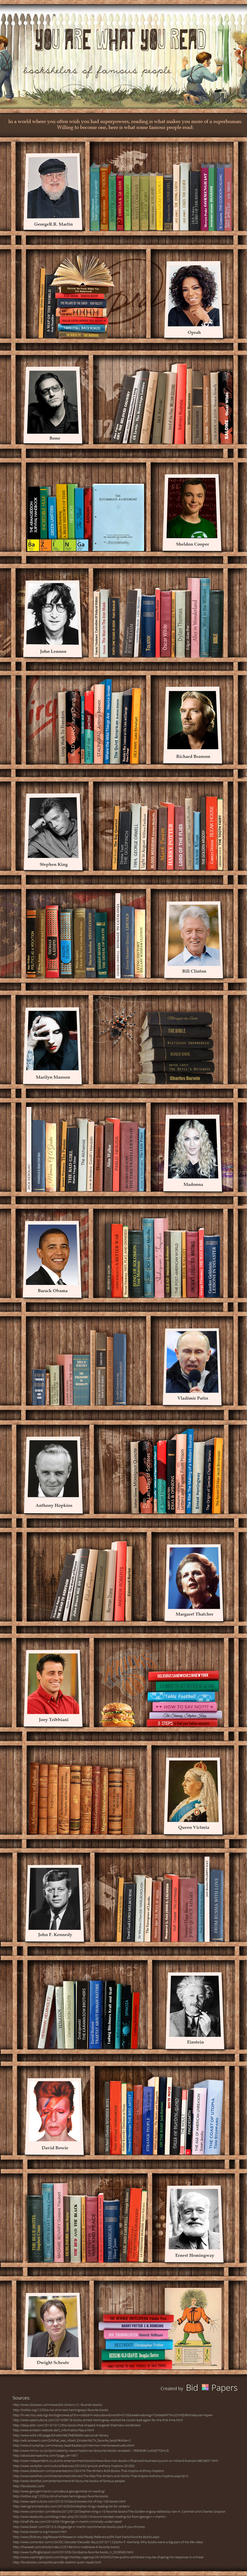 You are what you read - bookshelves of famous people